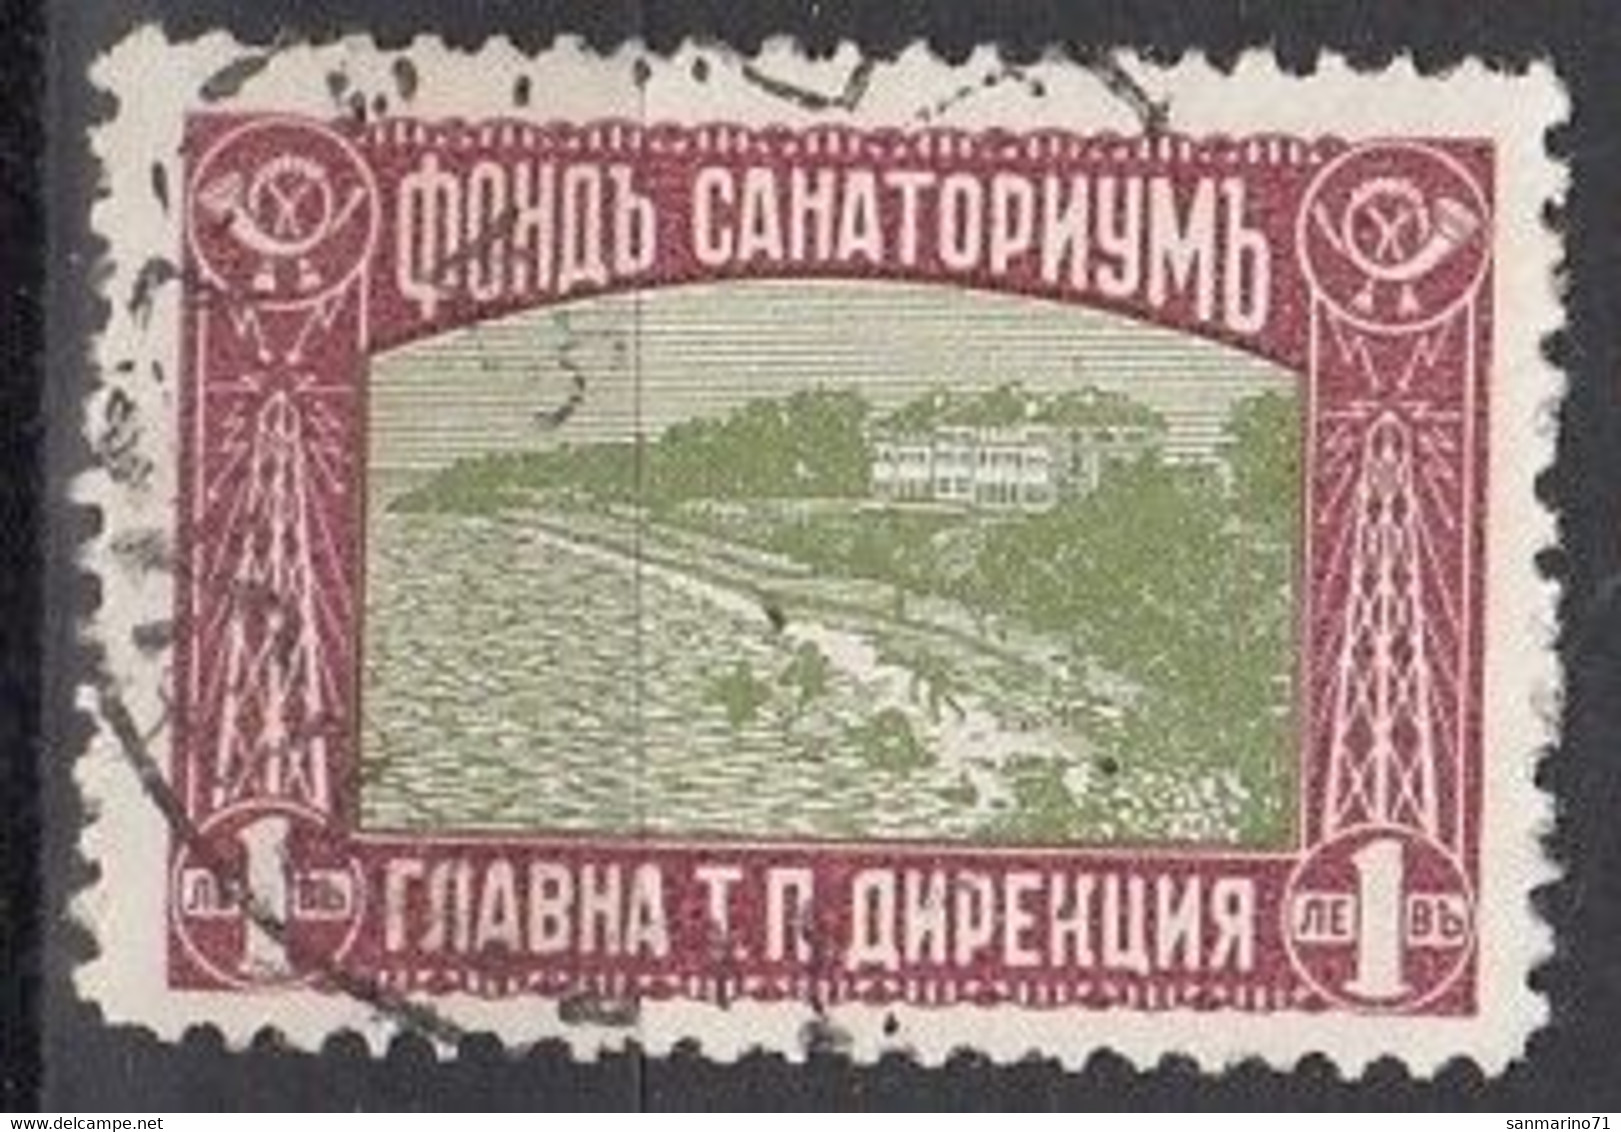 BULGARIA Red Cross 10,used,falc Hinged - Postage Due